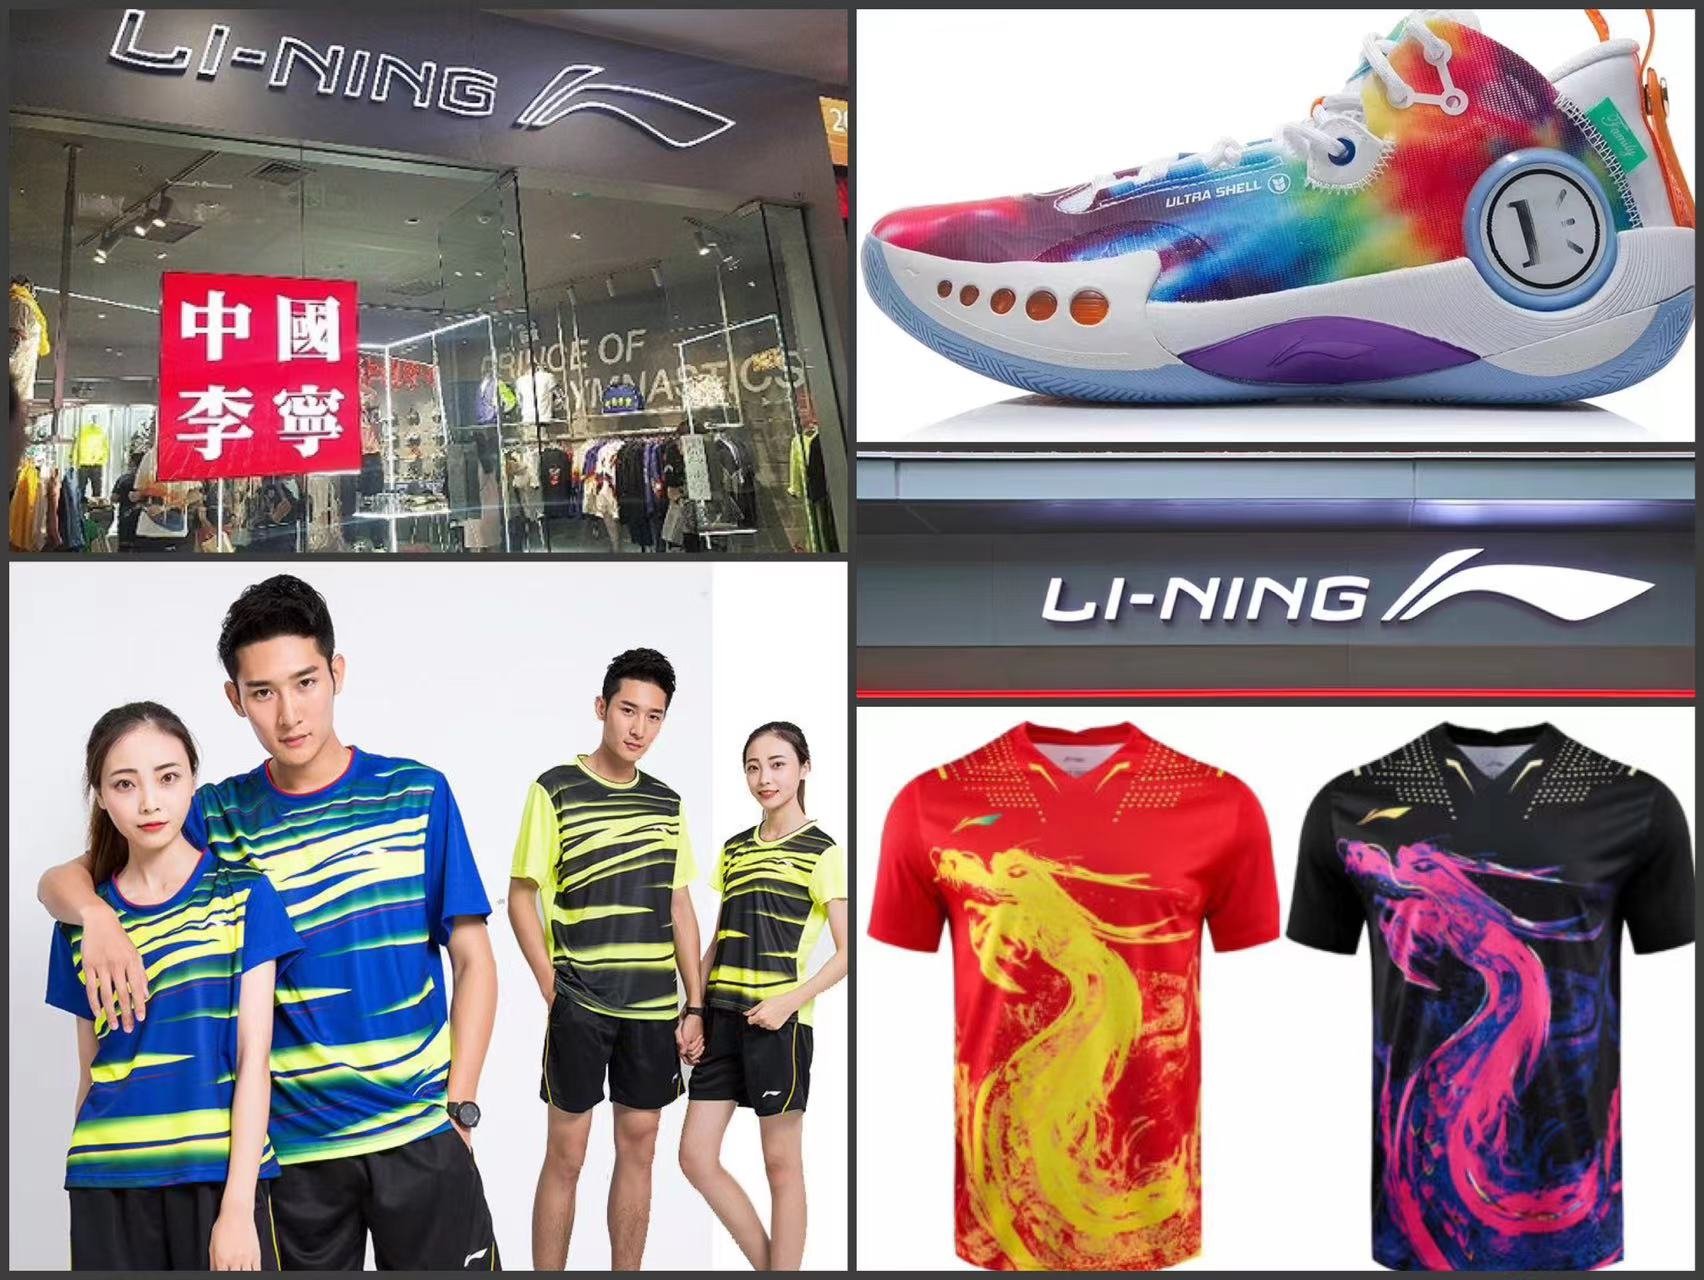 Kim YoungAh: The Chinese consumer has been wooed by bold designs from Chinese sportswear brands like 李宁 [Lǐníng], so adidas needs to be aware of its competition.